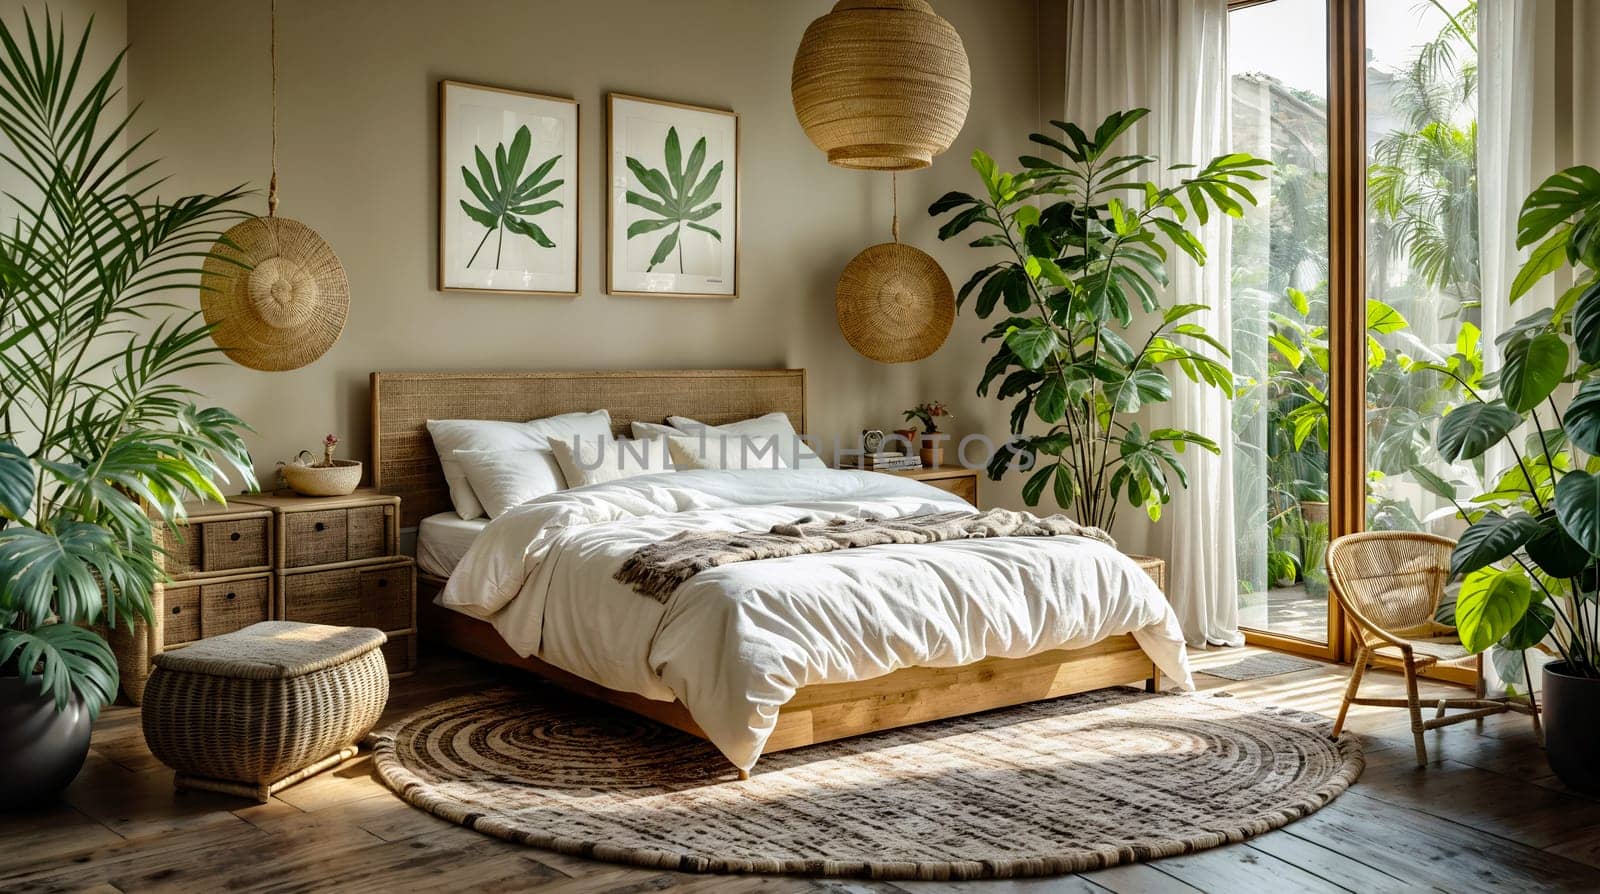 Sunny scandinavian Bedroom With Natural Decor Elements by chrisroll